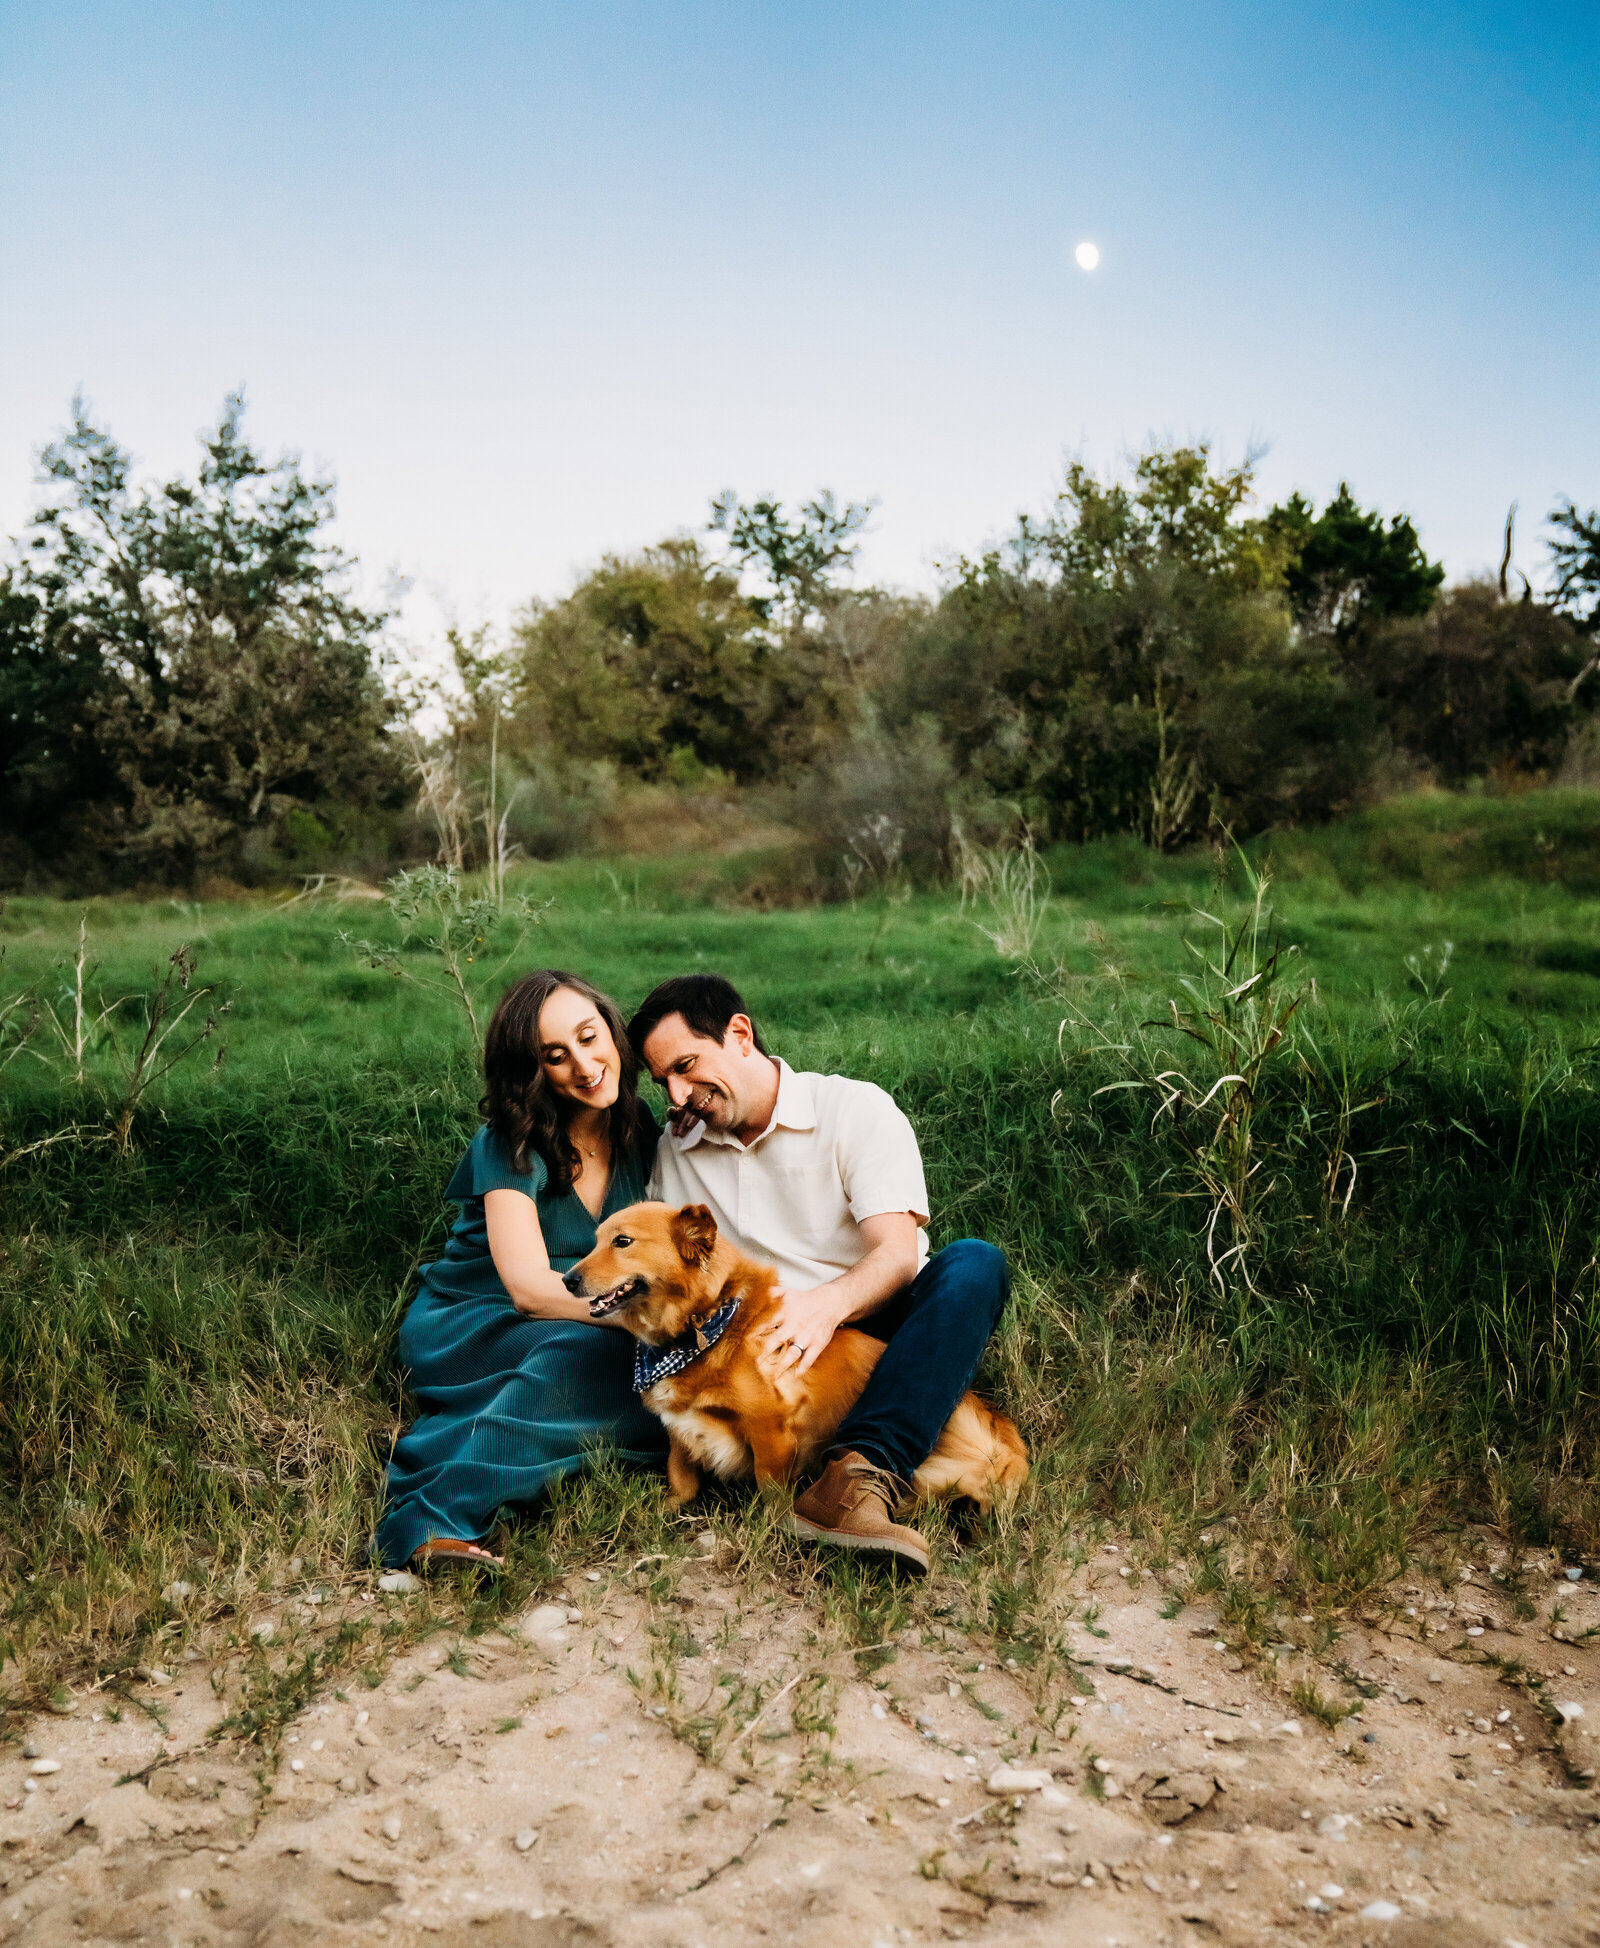 Maternity Photographer, Pregnant woman and her husband sit in the grass and play with their dog, everyone's happy